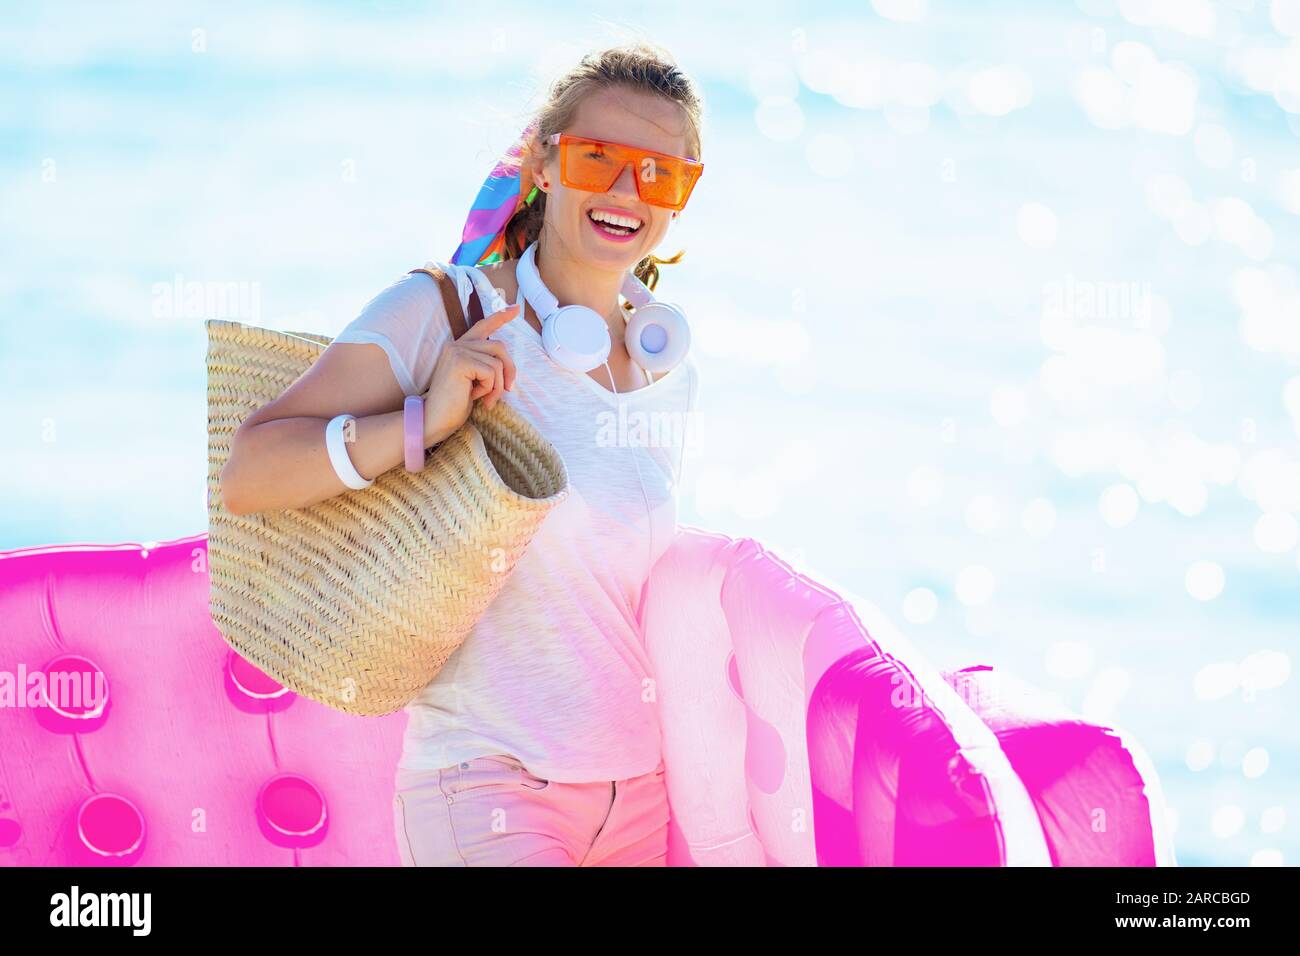 Portrait of smiling trendy woman in white t-shirt and pink shorts with beach straw bag on the seacoast holding inflatable mattress. Stock Photo